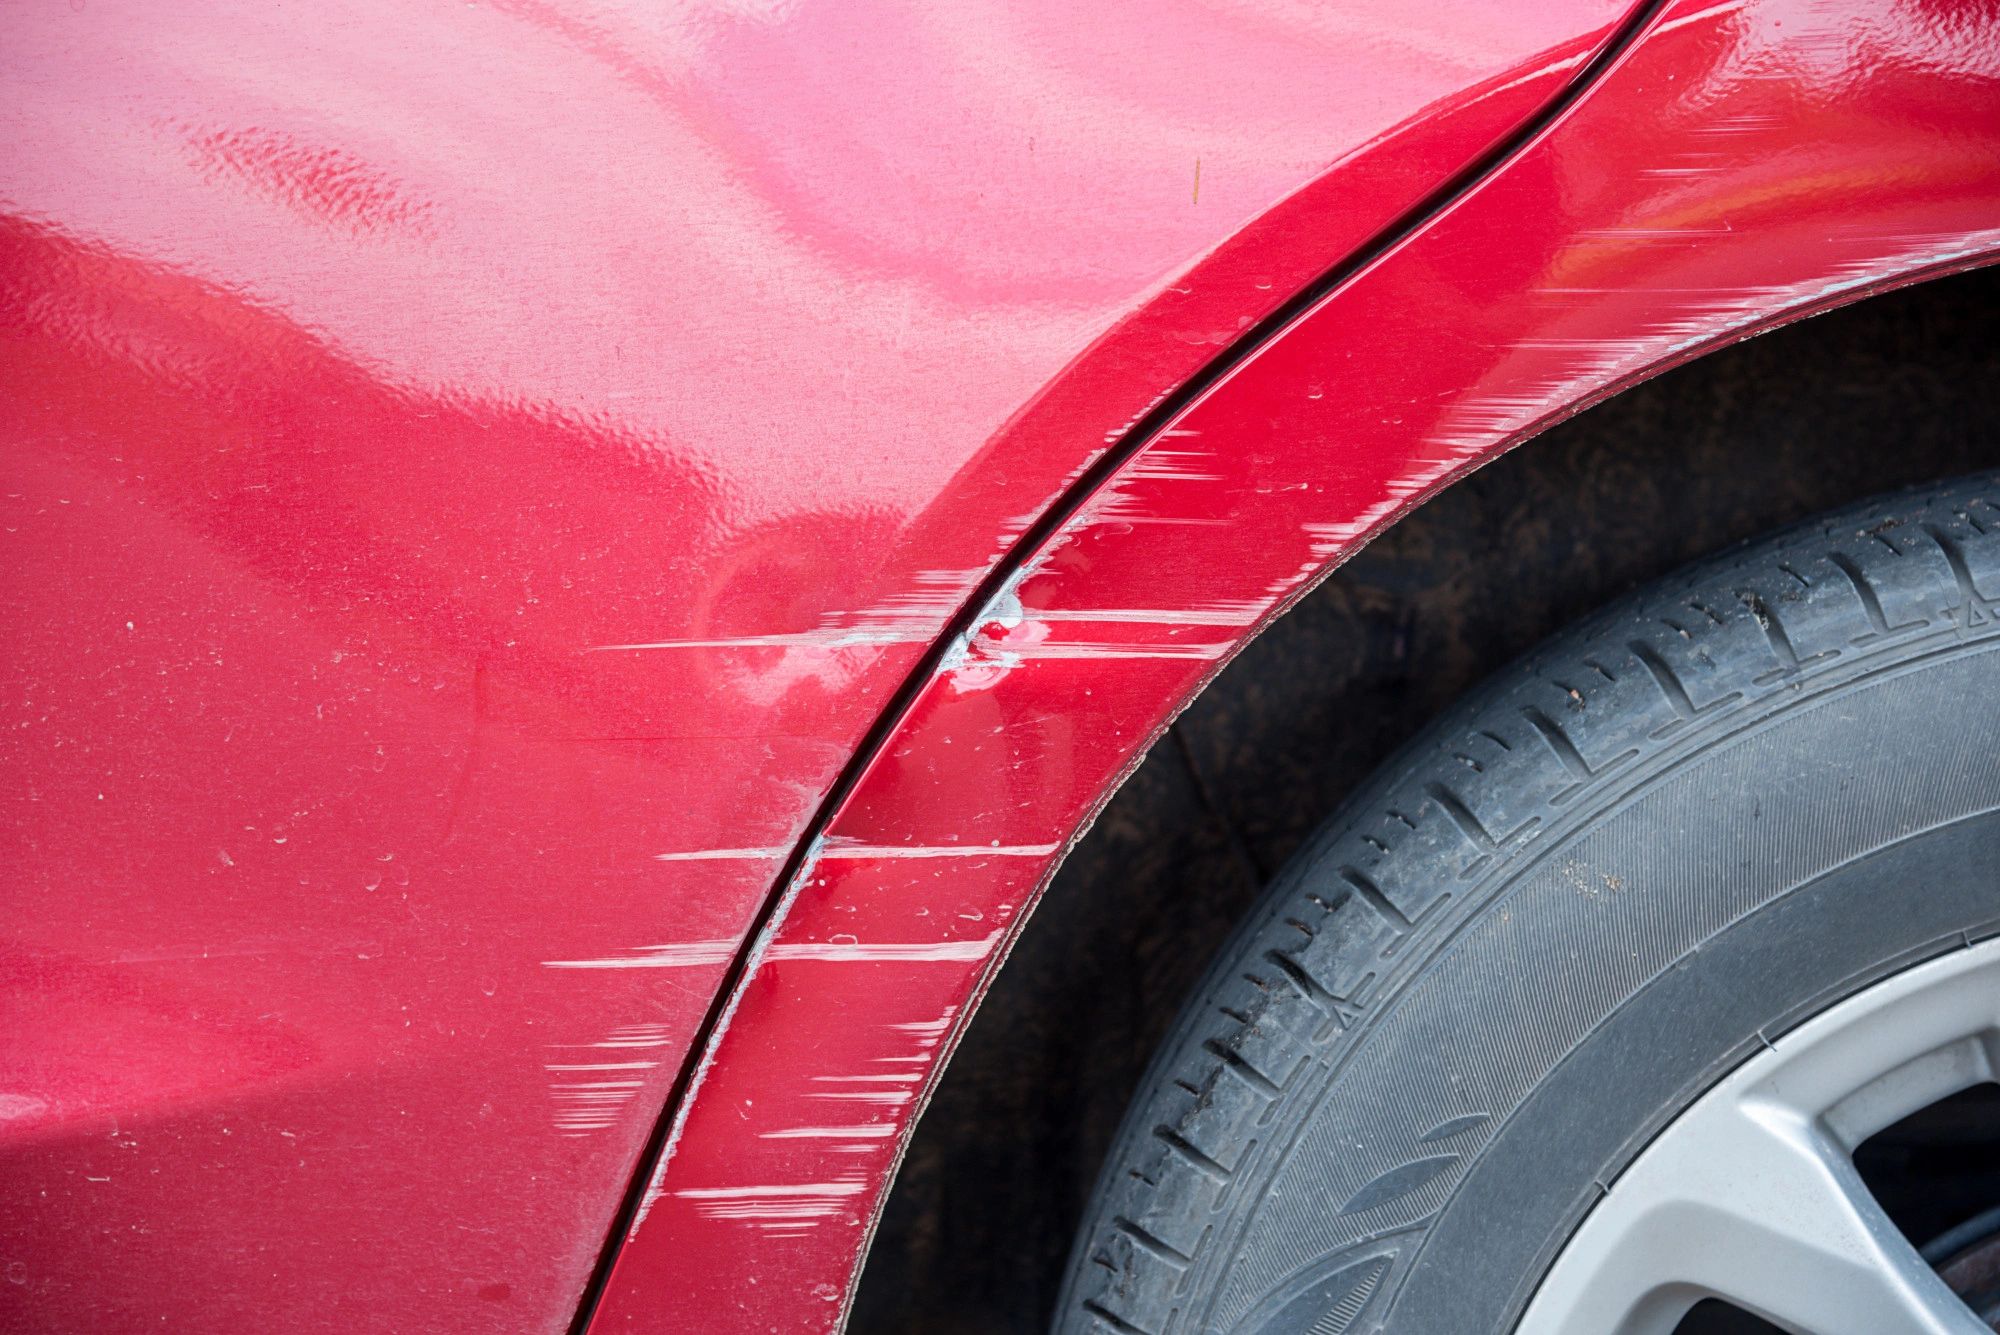 Your Car's Paint Job Is Not a DIY Project